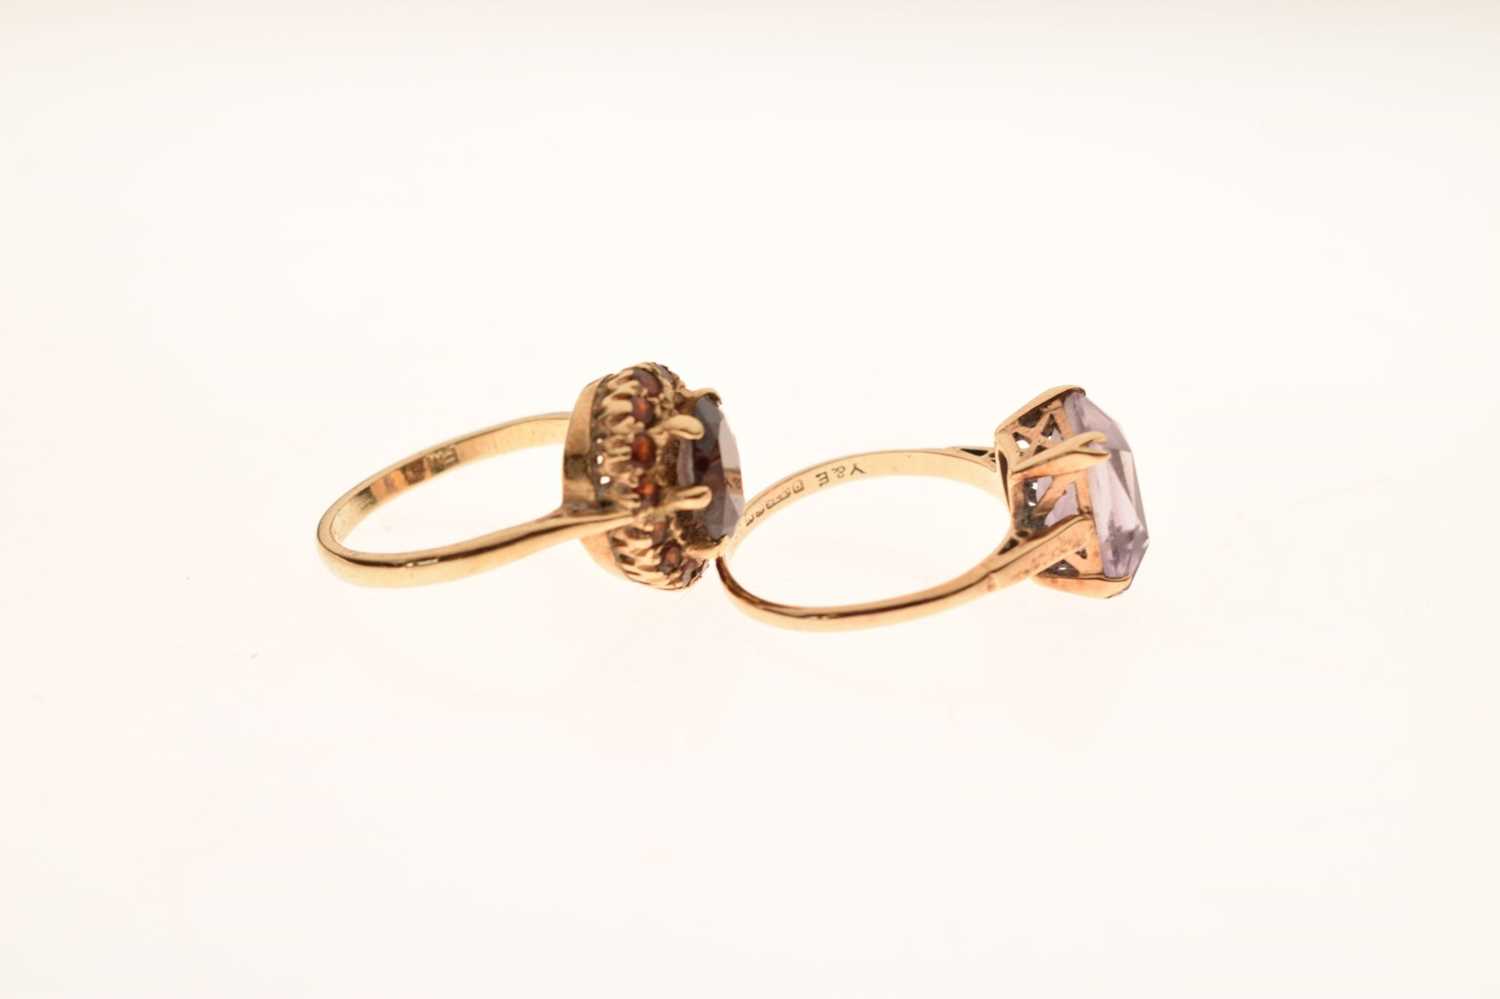 Two 9ct gold gem-set rings - Image 4 of 6